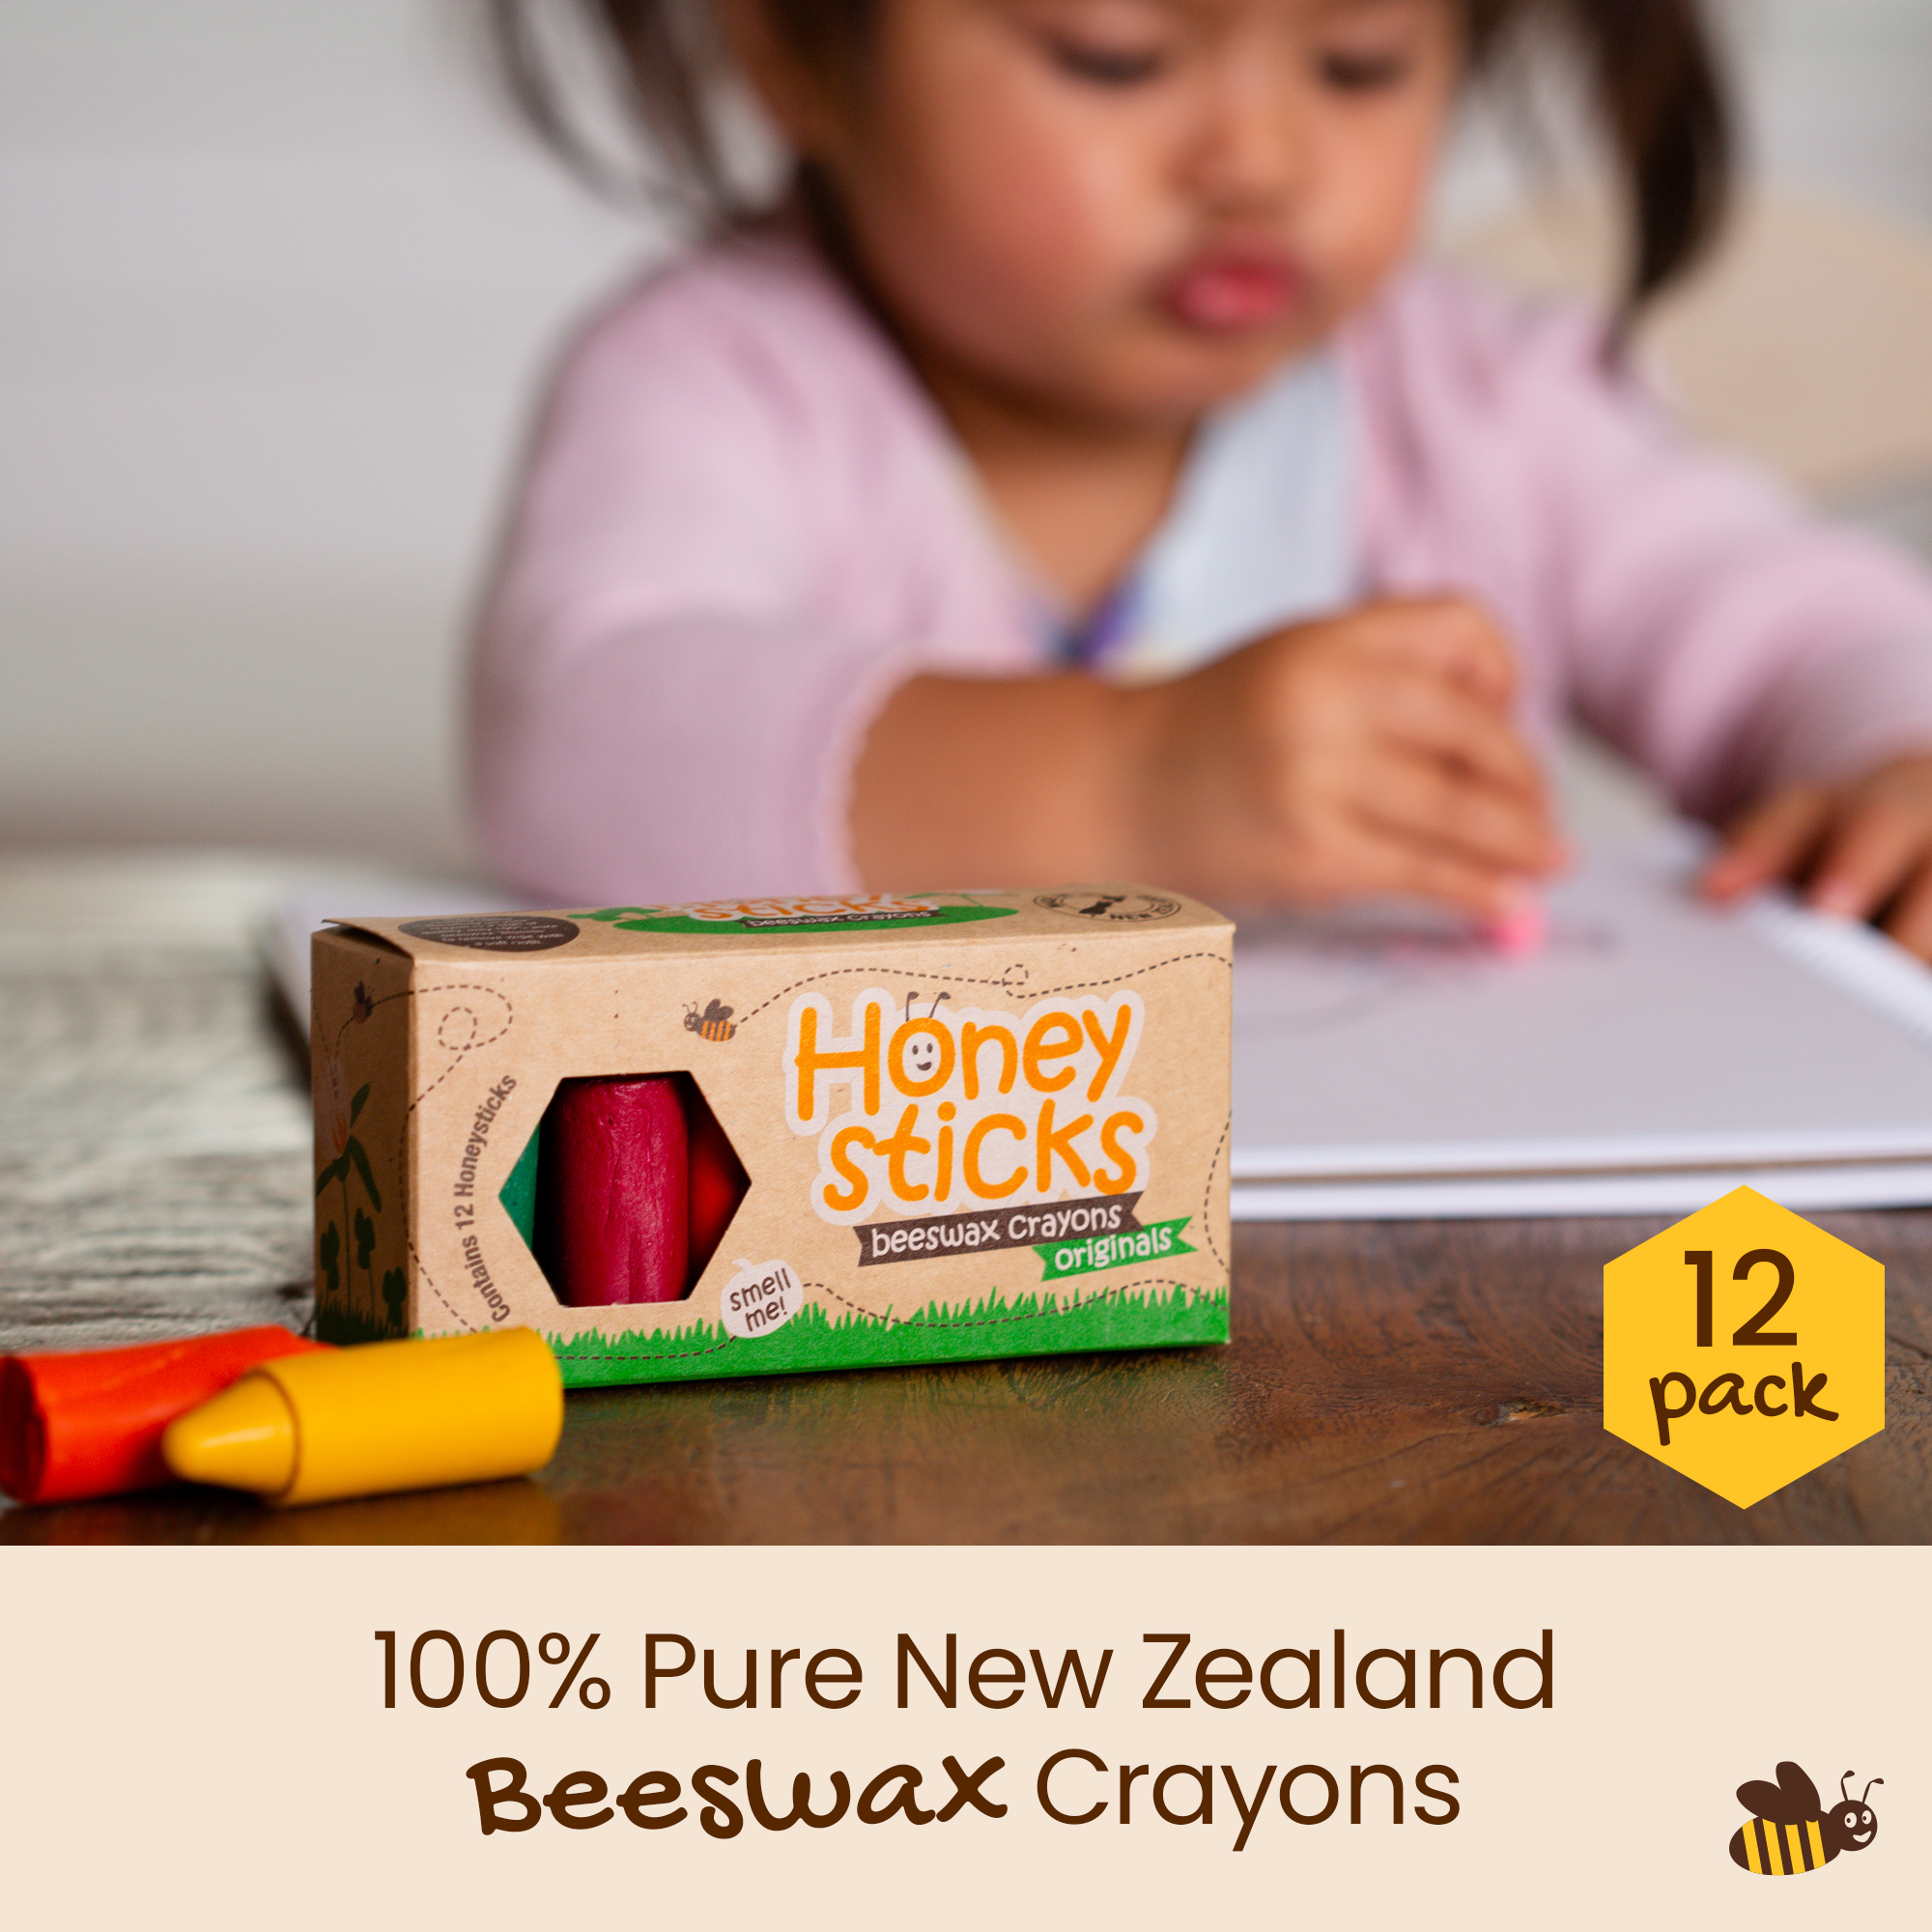 Honeysticks 100% Pure Beeswax Crayons (12 Pack) - Non Toxic Crayons Handmade with Natural Beeswax and Food Grade Colours - Child / Toddler Safe, Easy to Hold and Use - Sustainably Made in New Zealand - image 4 of 6